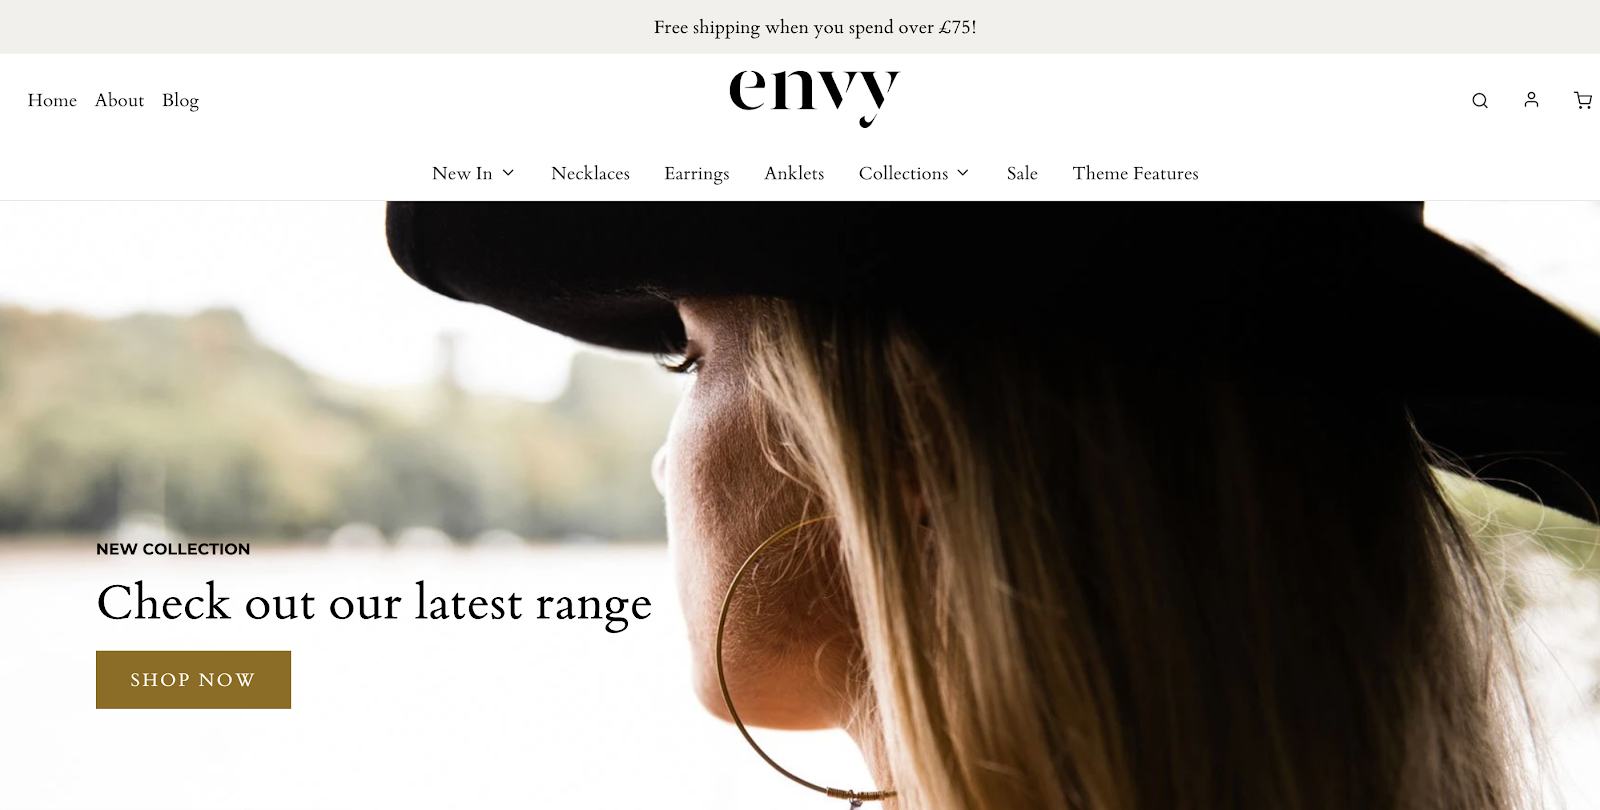 homepage of one of the best fashion themes in shopify that is called envy